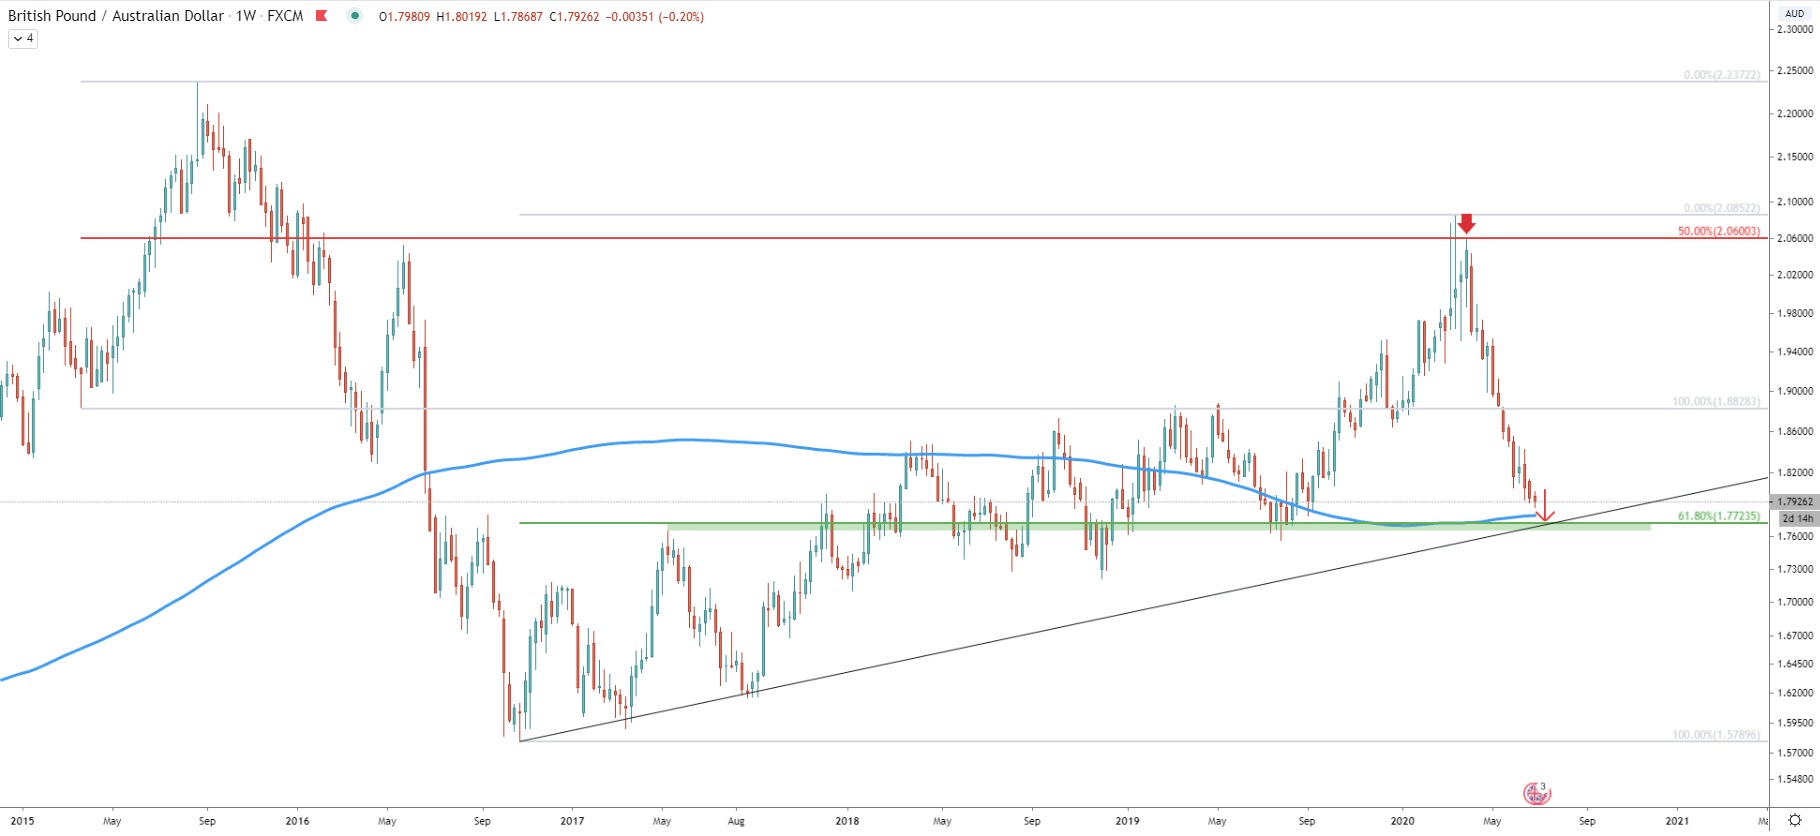 GBP/AUD Weekly Technical Analysis 1 July 2020